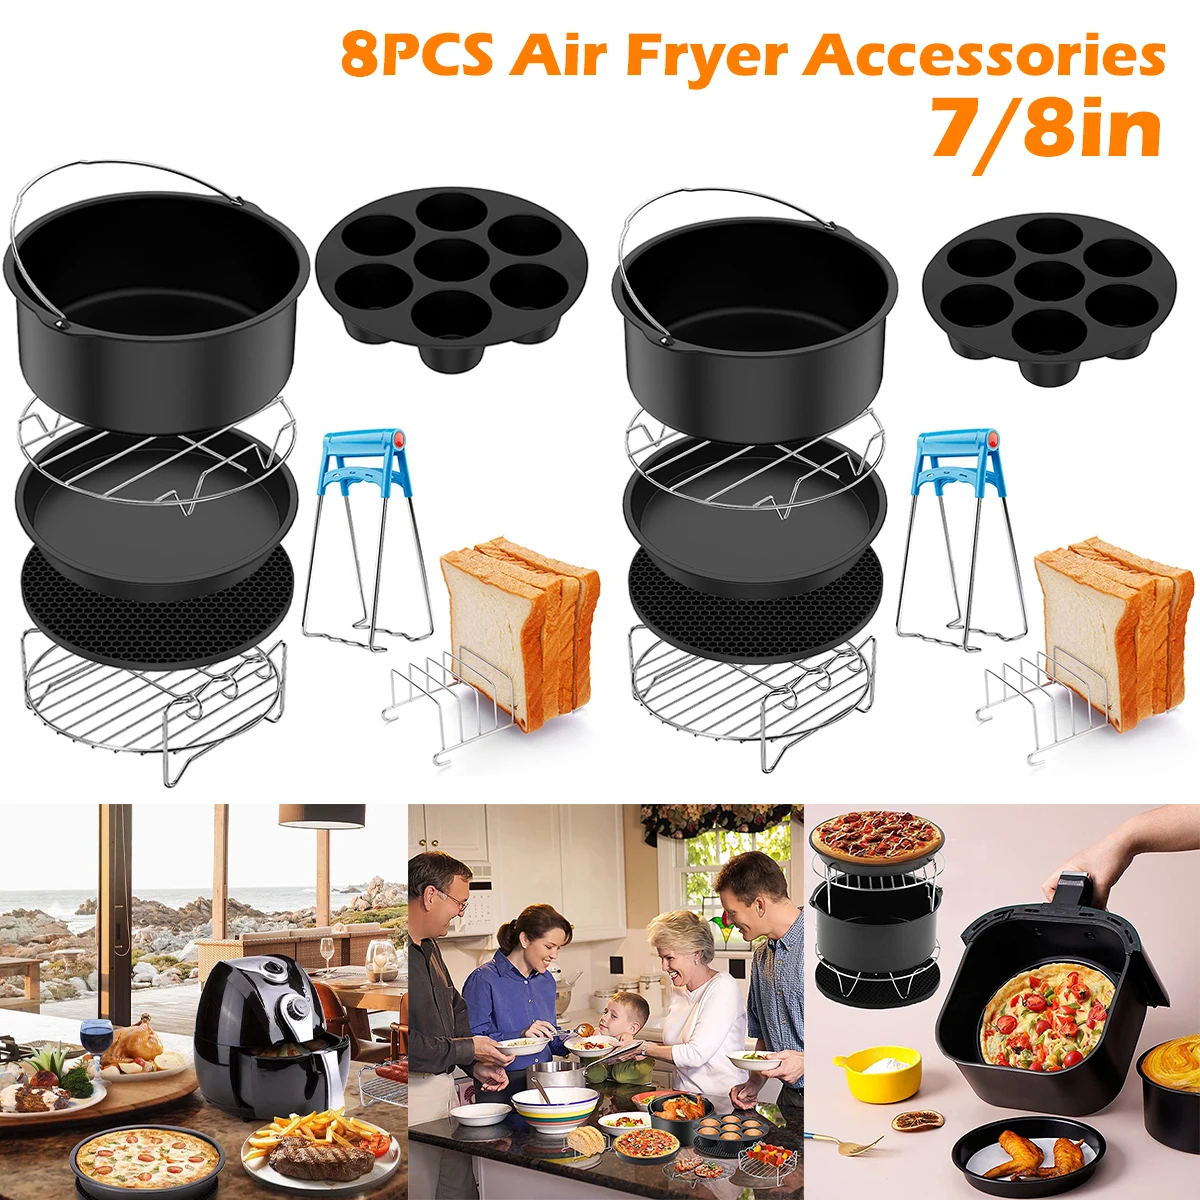 

8Pcs Air Fryer Accessories Set Food-grade Air Fryer Accessories with Cake Basket Pizza Pan Stainless Steel Skewer Rack Silicone